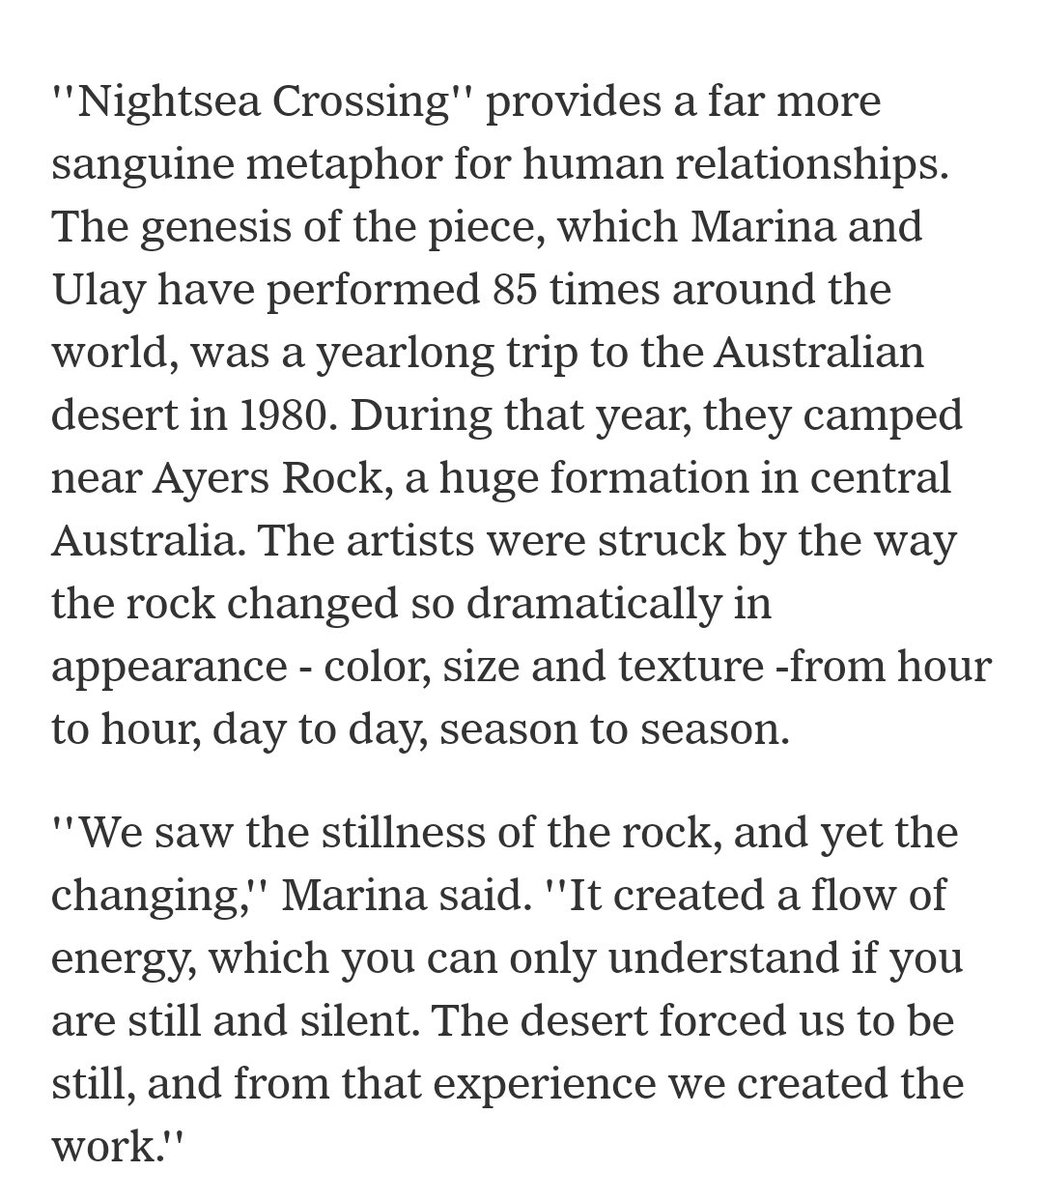 Guess who just so happened to be in Ayers Rock in 1980 for a new art installation? You guessed it.Marina and Ulay spent a full year in Ayers Rock for their art piece titled "Night Sea Crossing" https://www.nytimes.com/1986/02/21/arts/art-people.html?ref=oembed